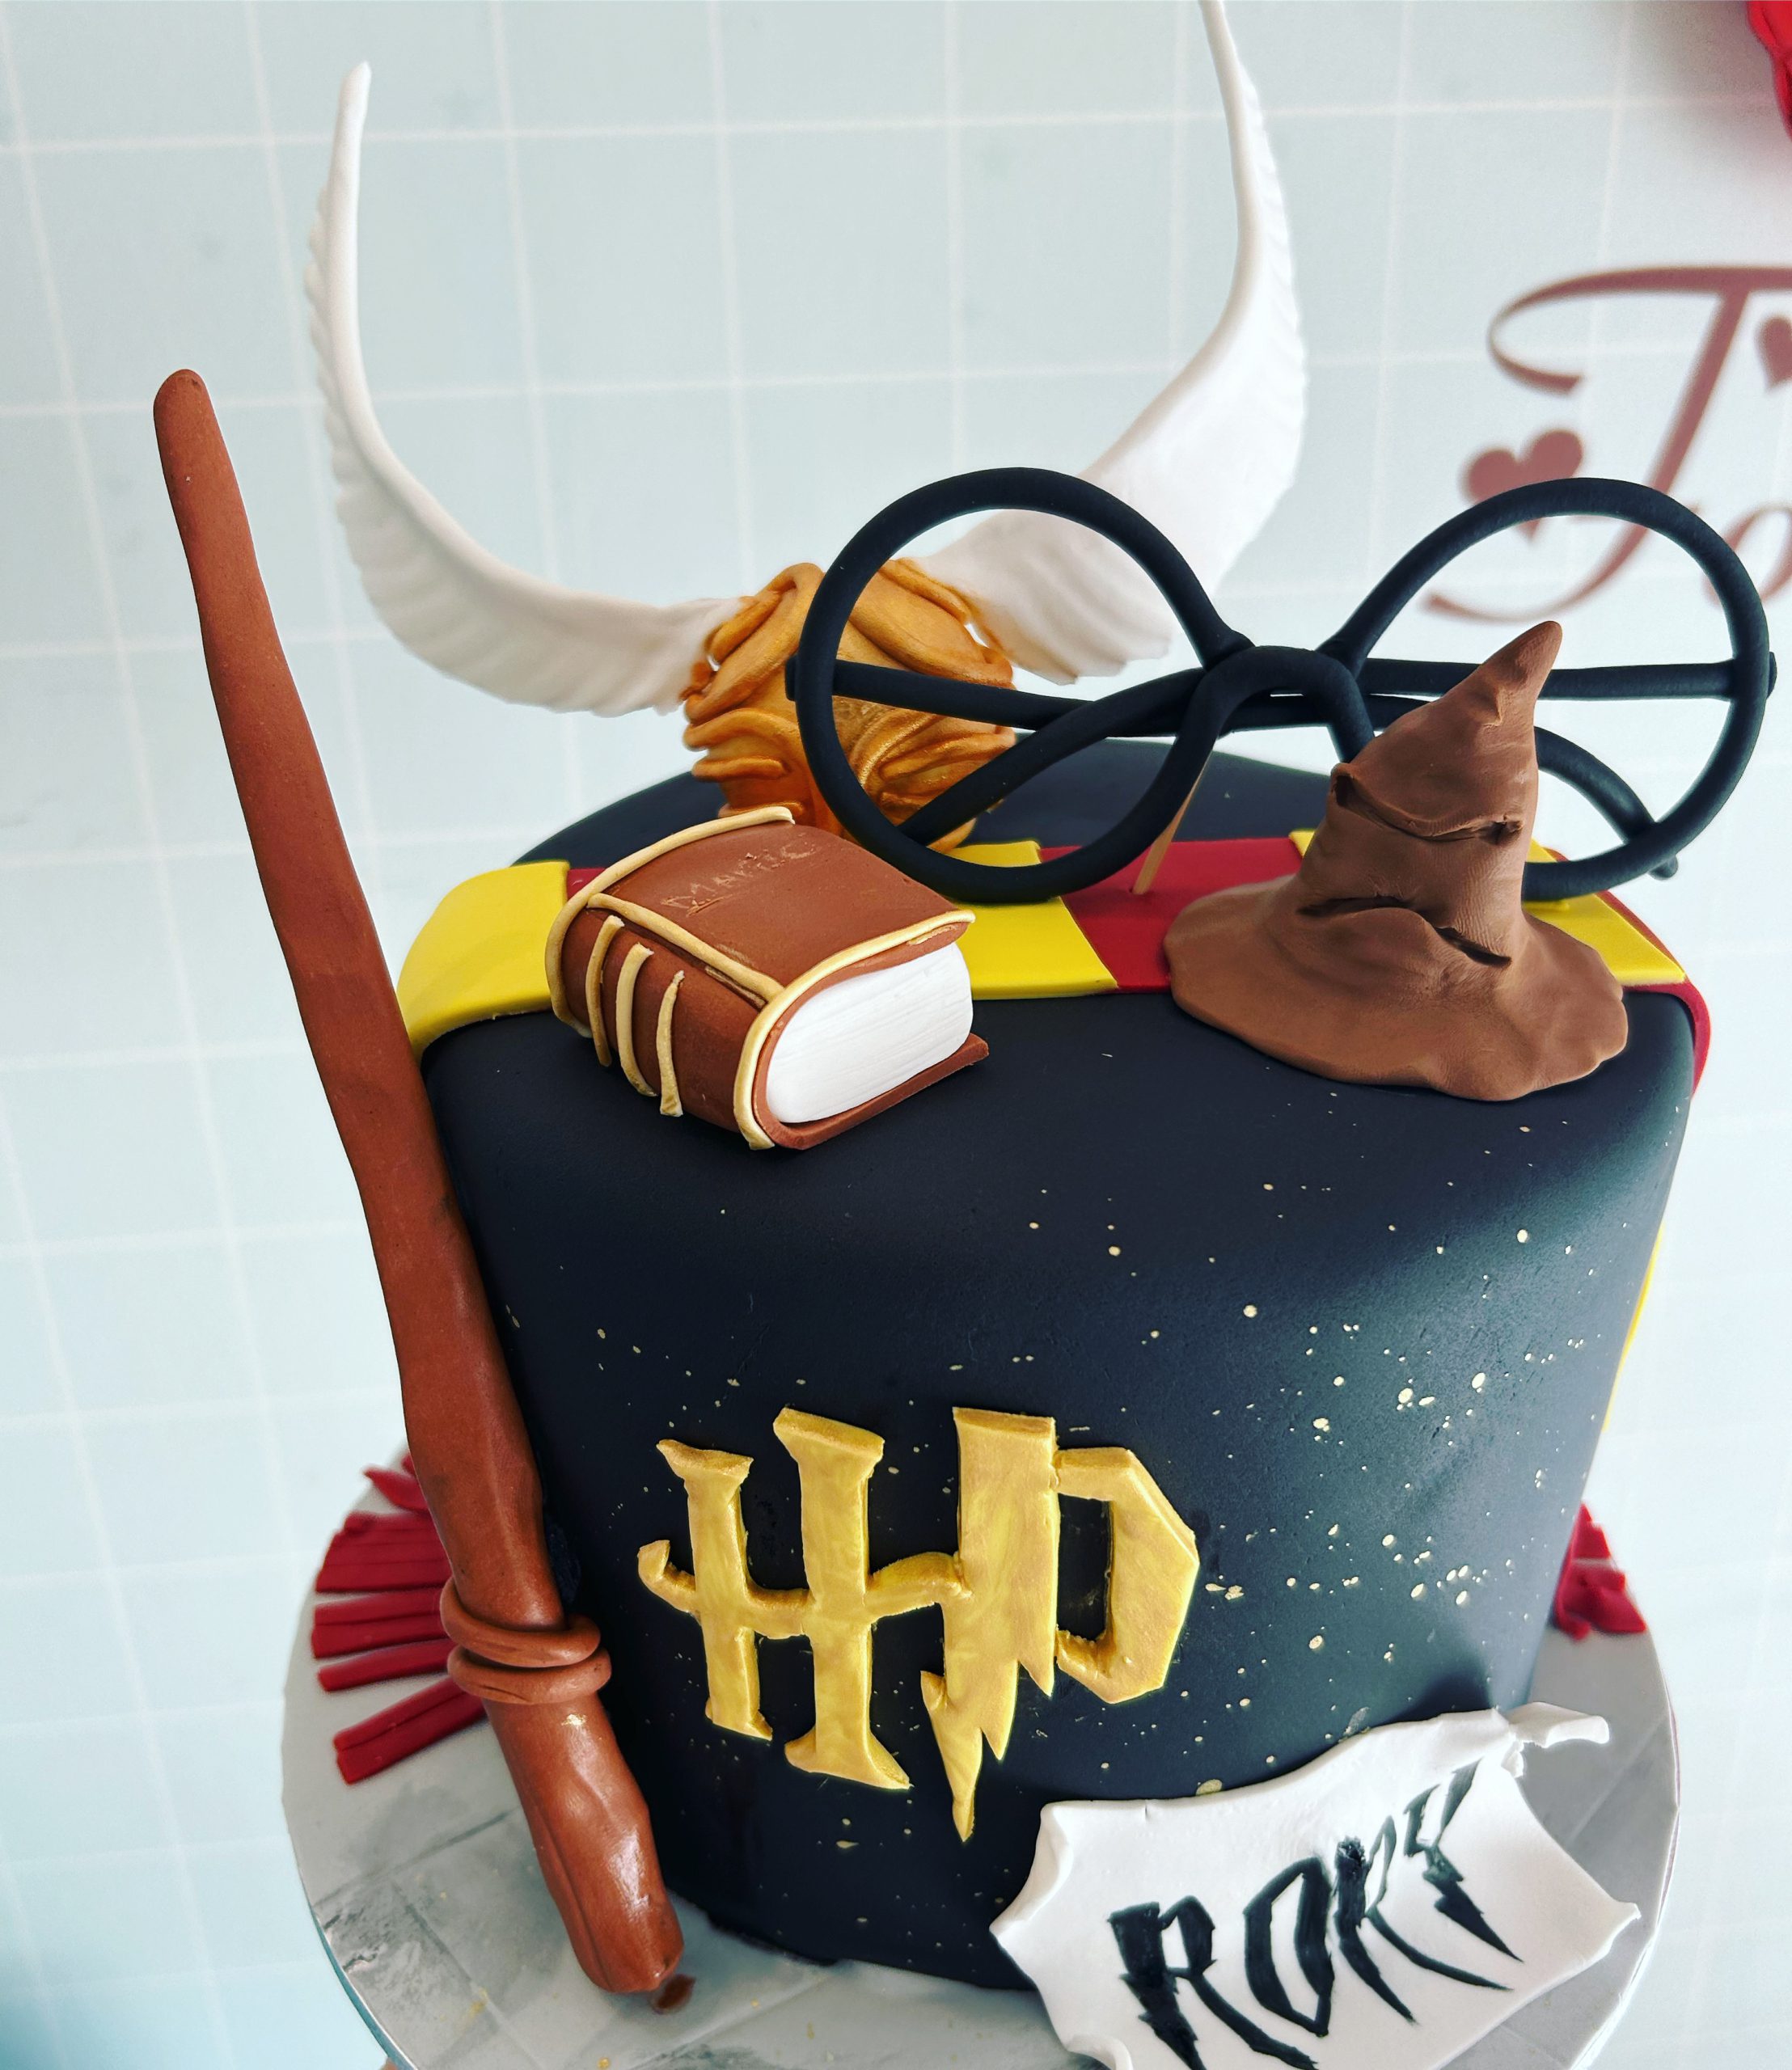 Kids and Character Cake - Harry Potter HOGWARTS Picturesque #22913 -  Aggie's Bakery & Cake Shop